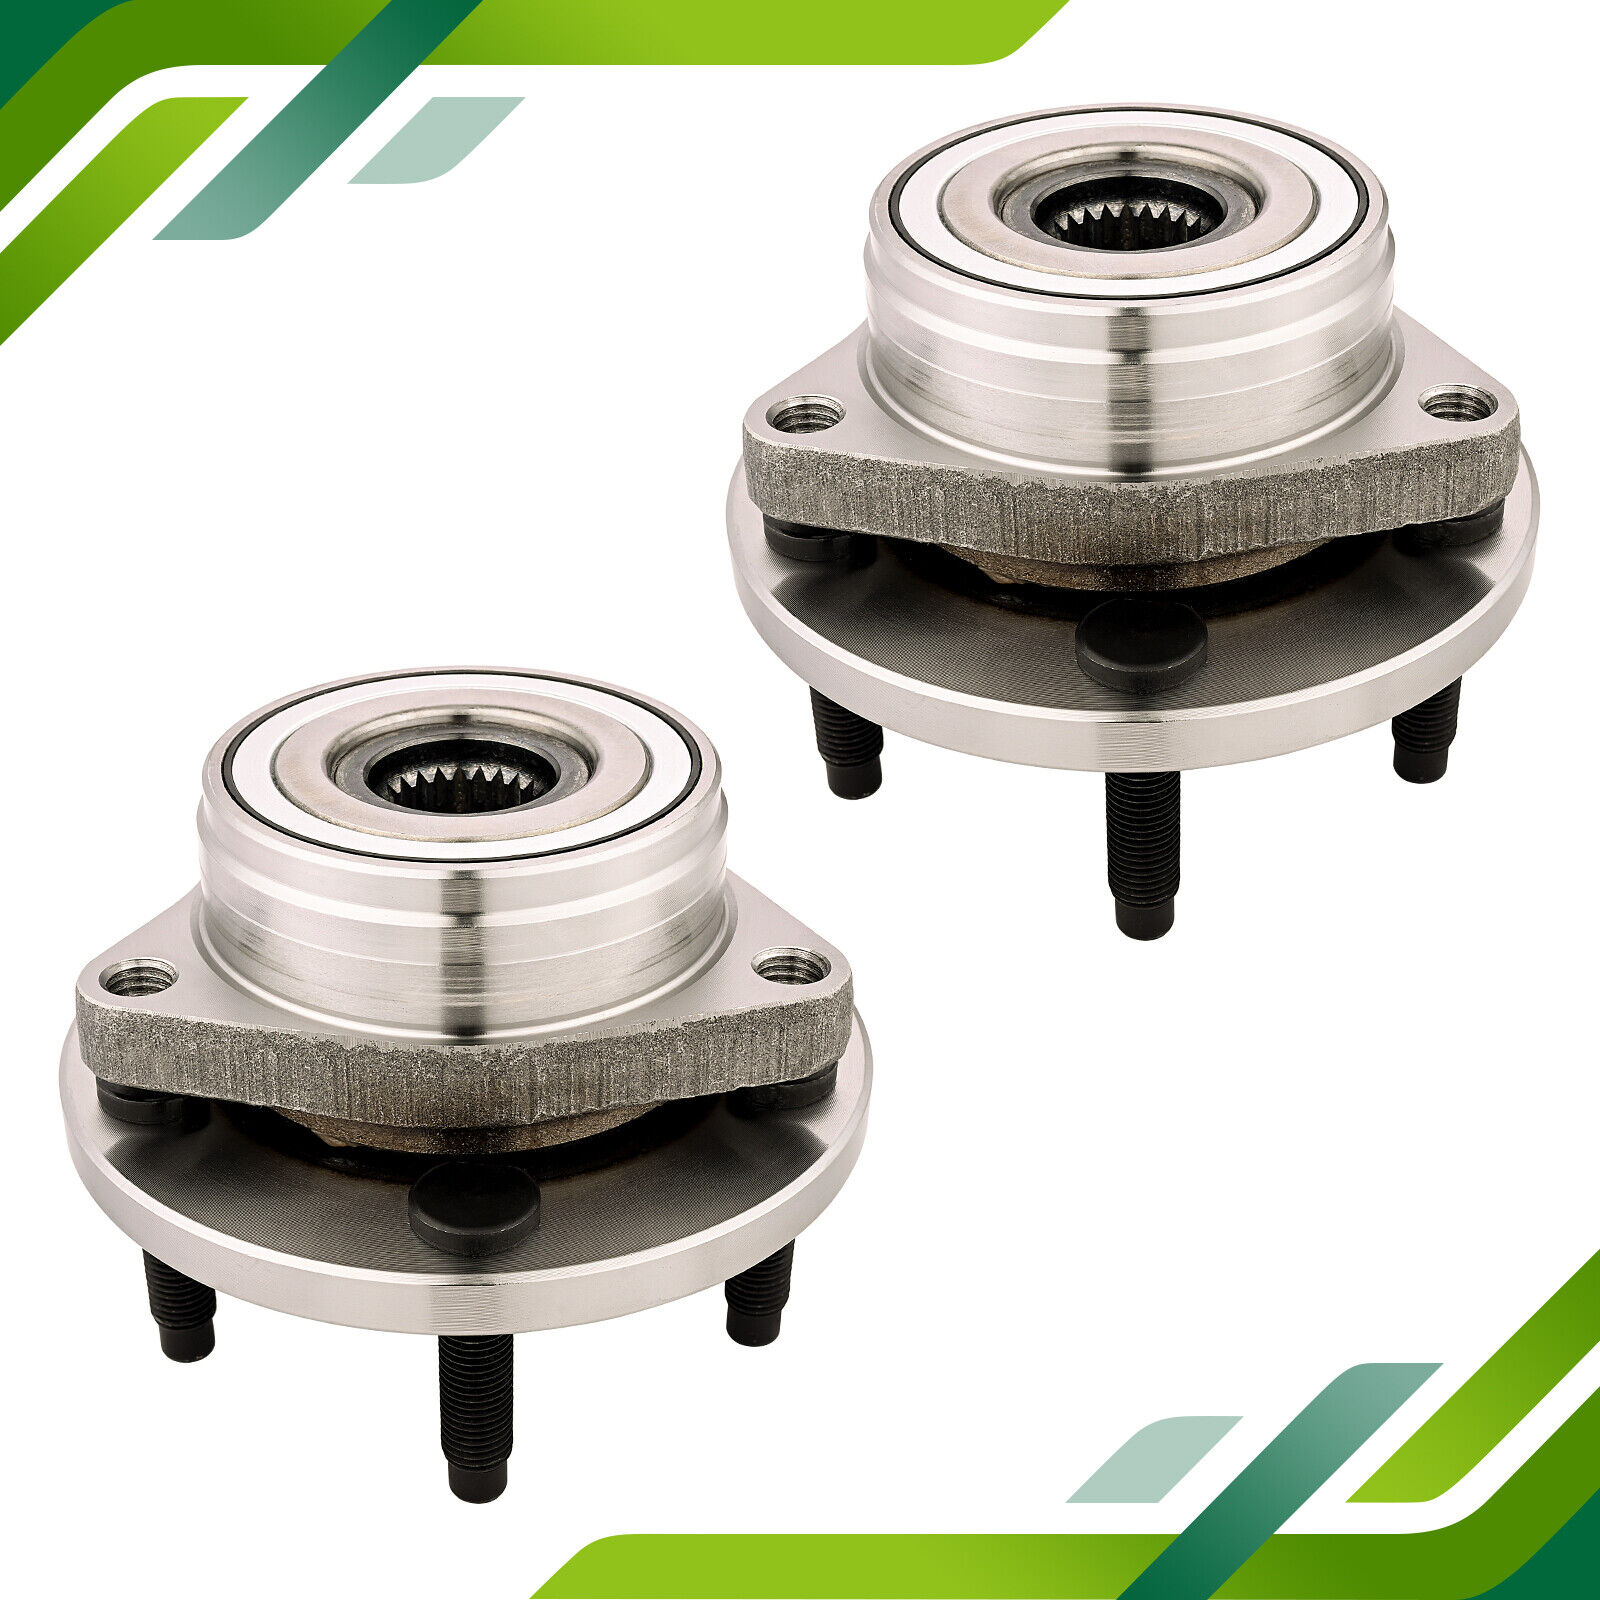 Pair Front Wheel Bearing & Hub for Ford Taurus Lincoln Continental Mercury Sable